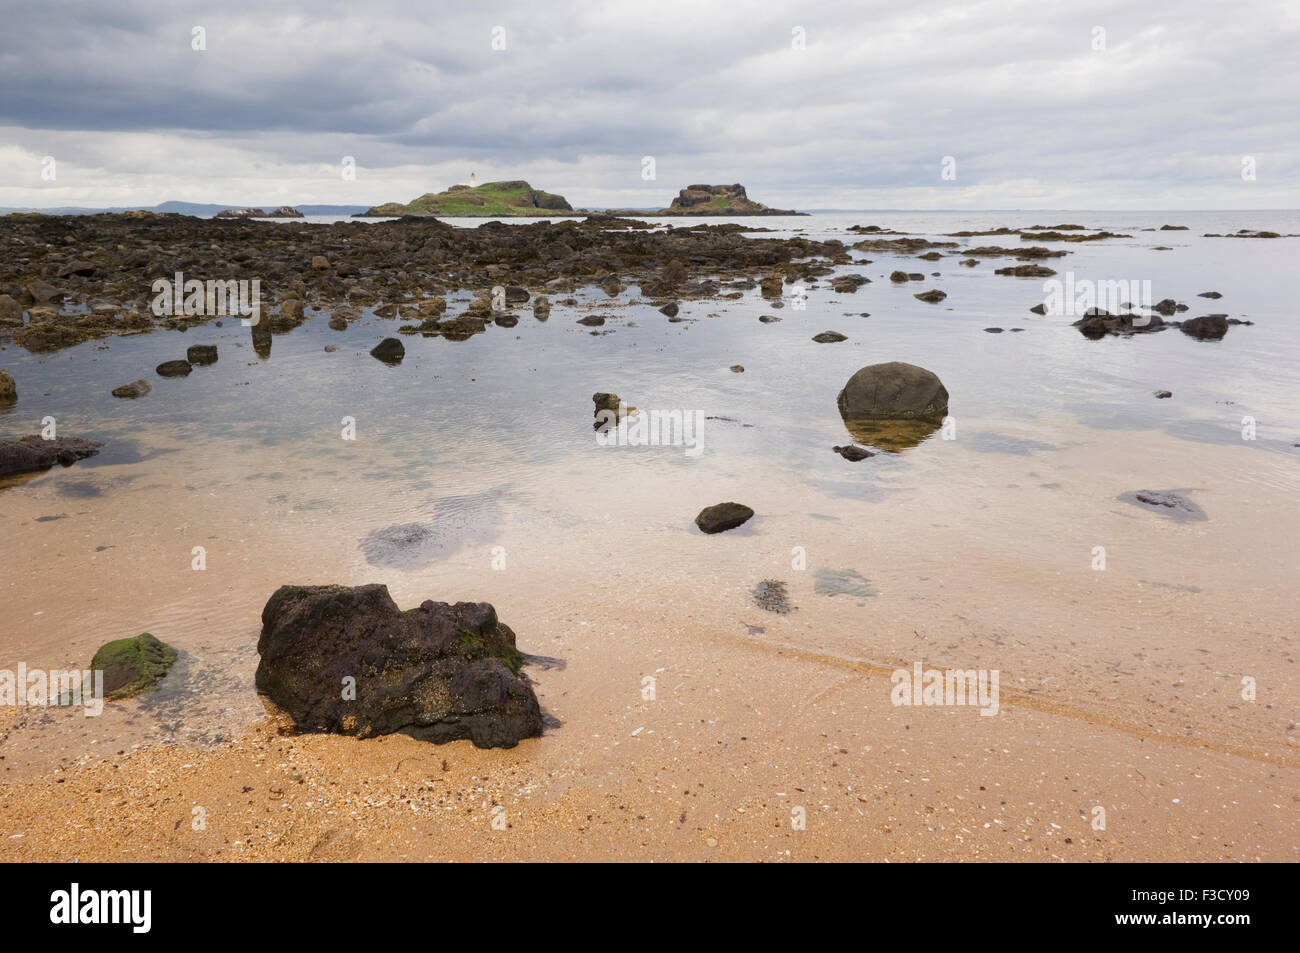 Yellowcraigs beach looking out to Fidra island and lighthouse, East Lothian, Scotland. Stock Photo